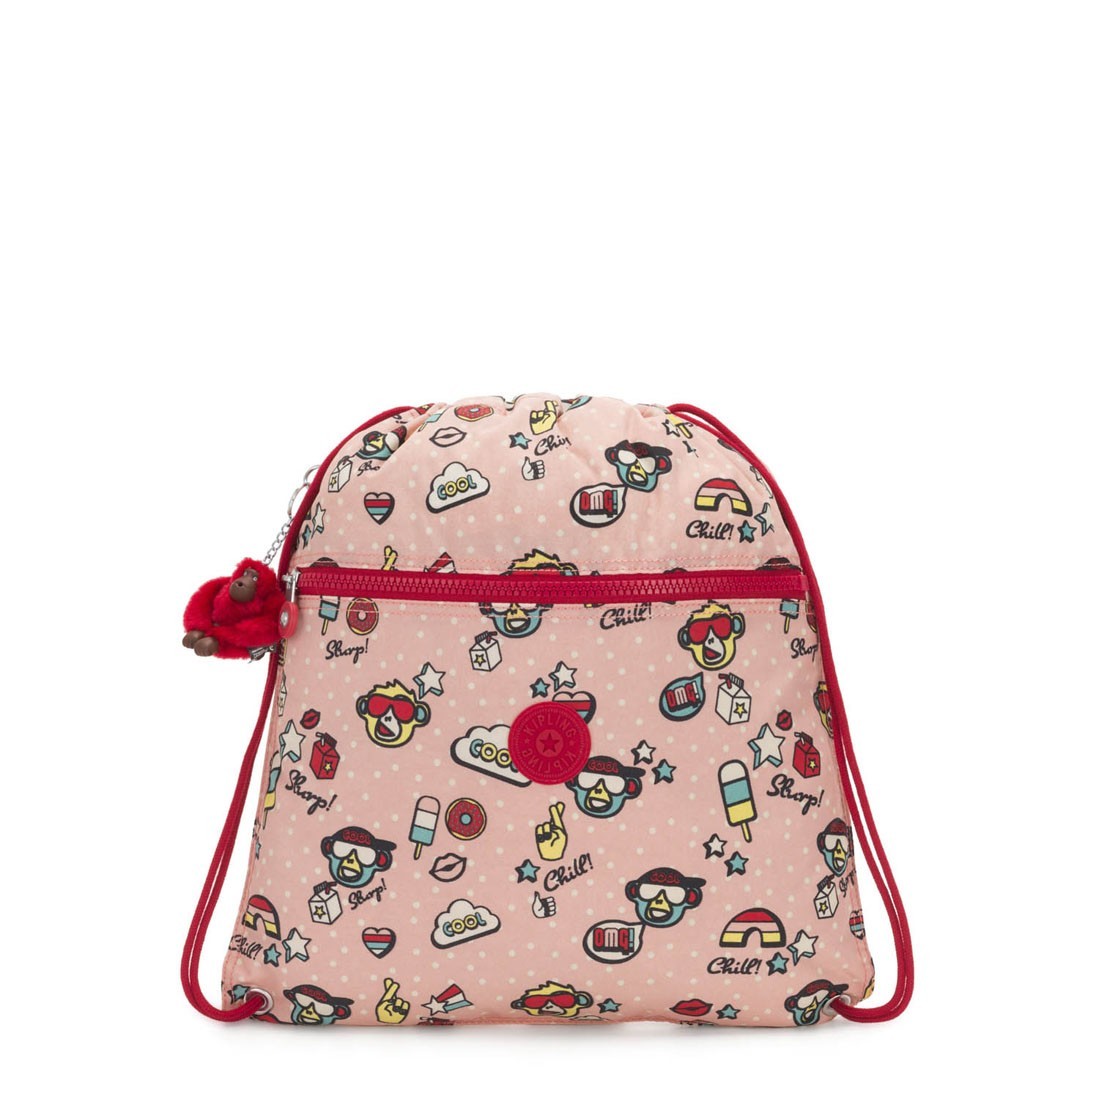 Buy Kipling Supertaboo Kid's Sports Bag - Monkey Play - Kipling, delivered  to your home | The Outfit